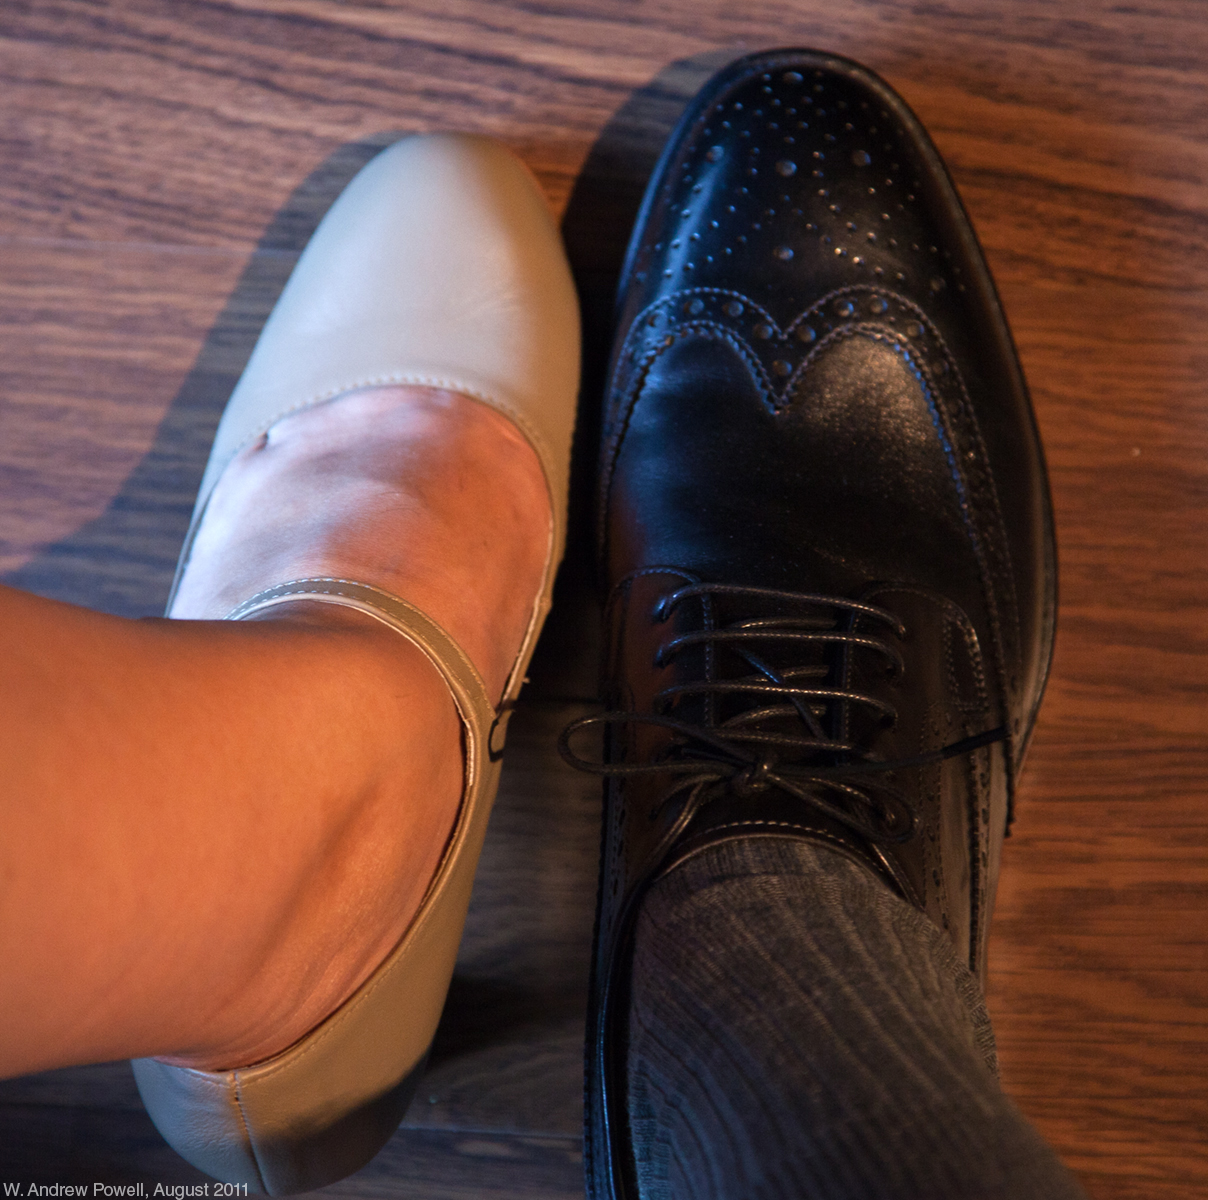 First snapshot - our wedding shoes